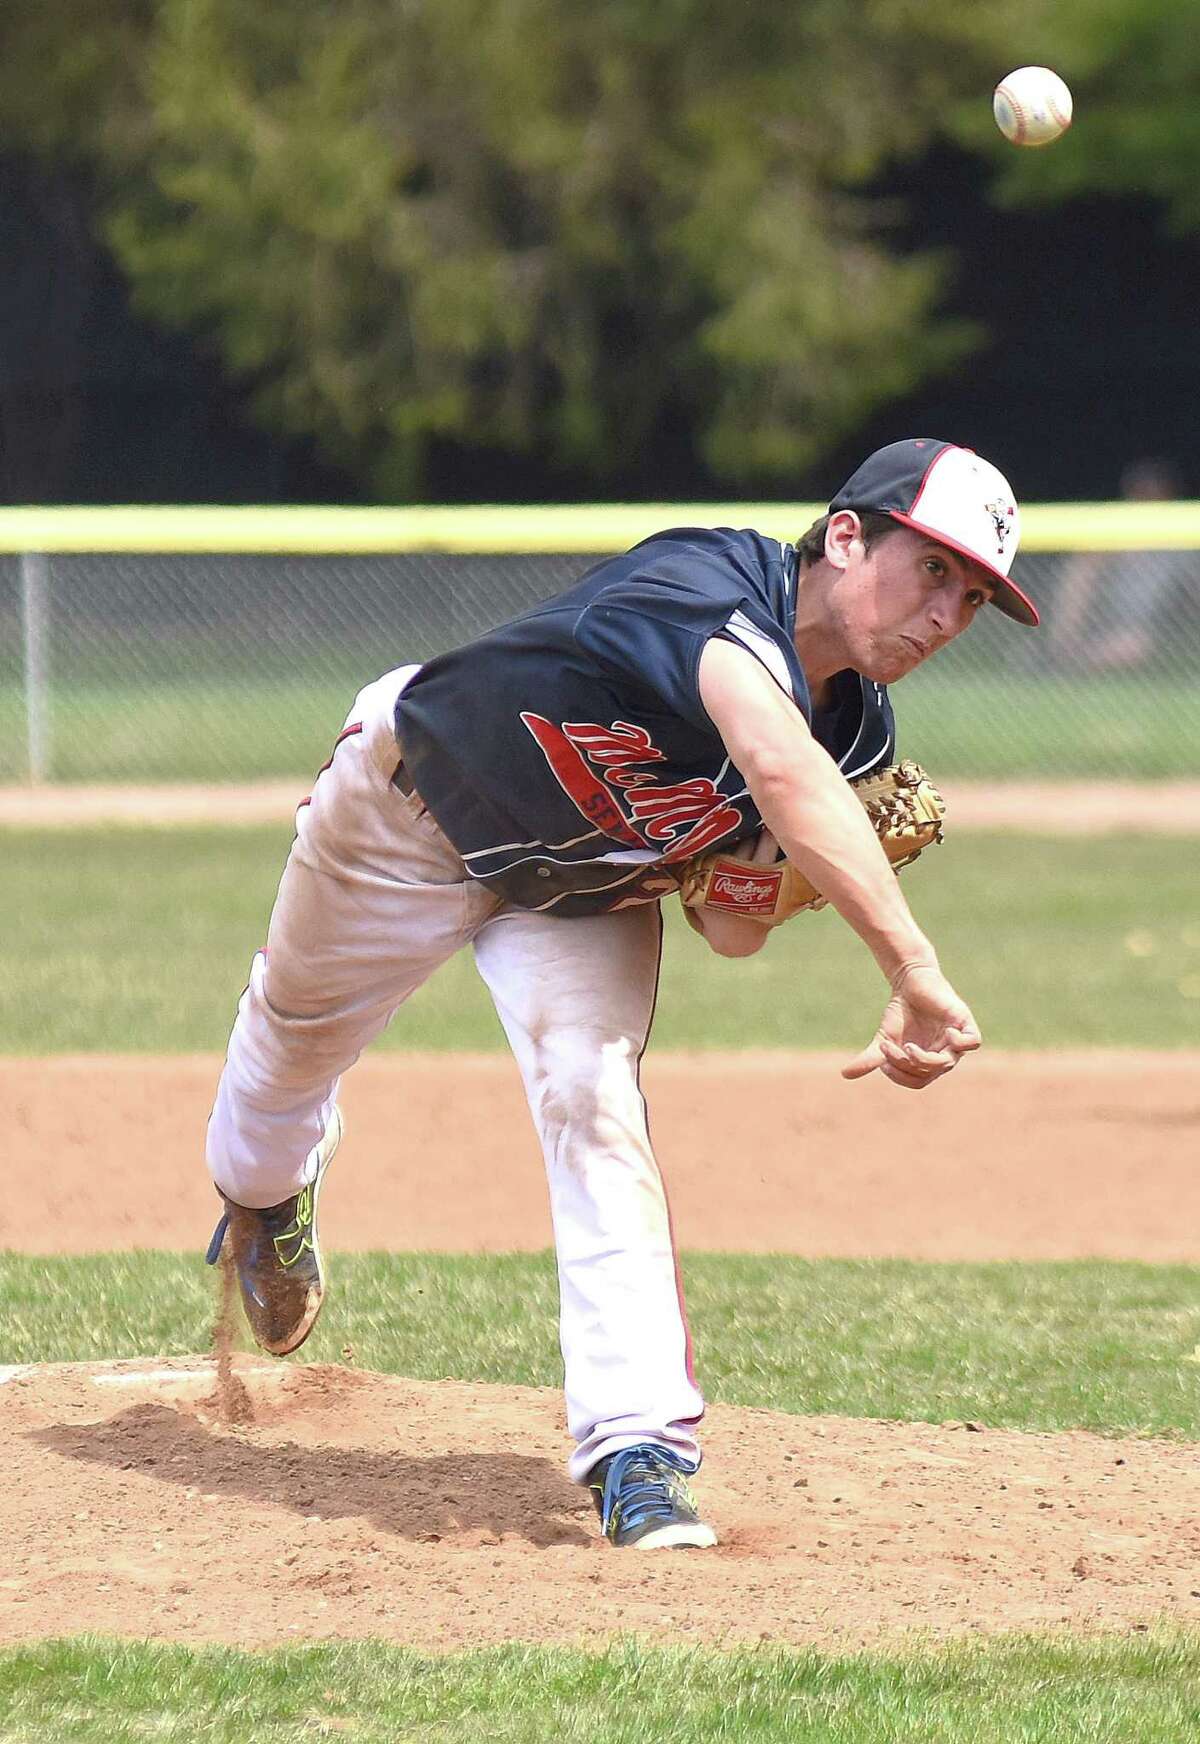 Brien McMahon sophomore pitcherJames Stefanowicz fires the ball to the plate during Monday's non-conference baseball game against Weston at Revson Field in Weston. Stefanowicz pitched five-plus shutout innings to lead the Senators to a 9-2 win.